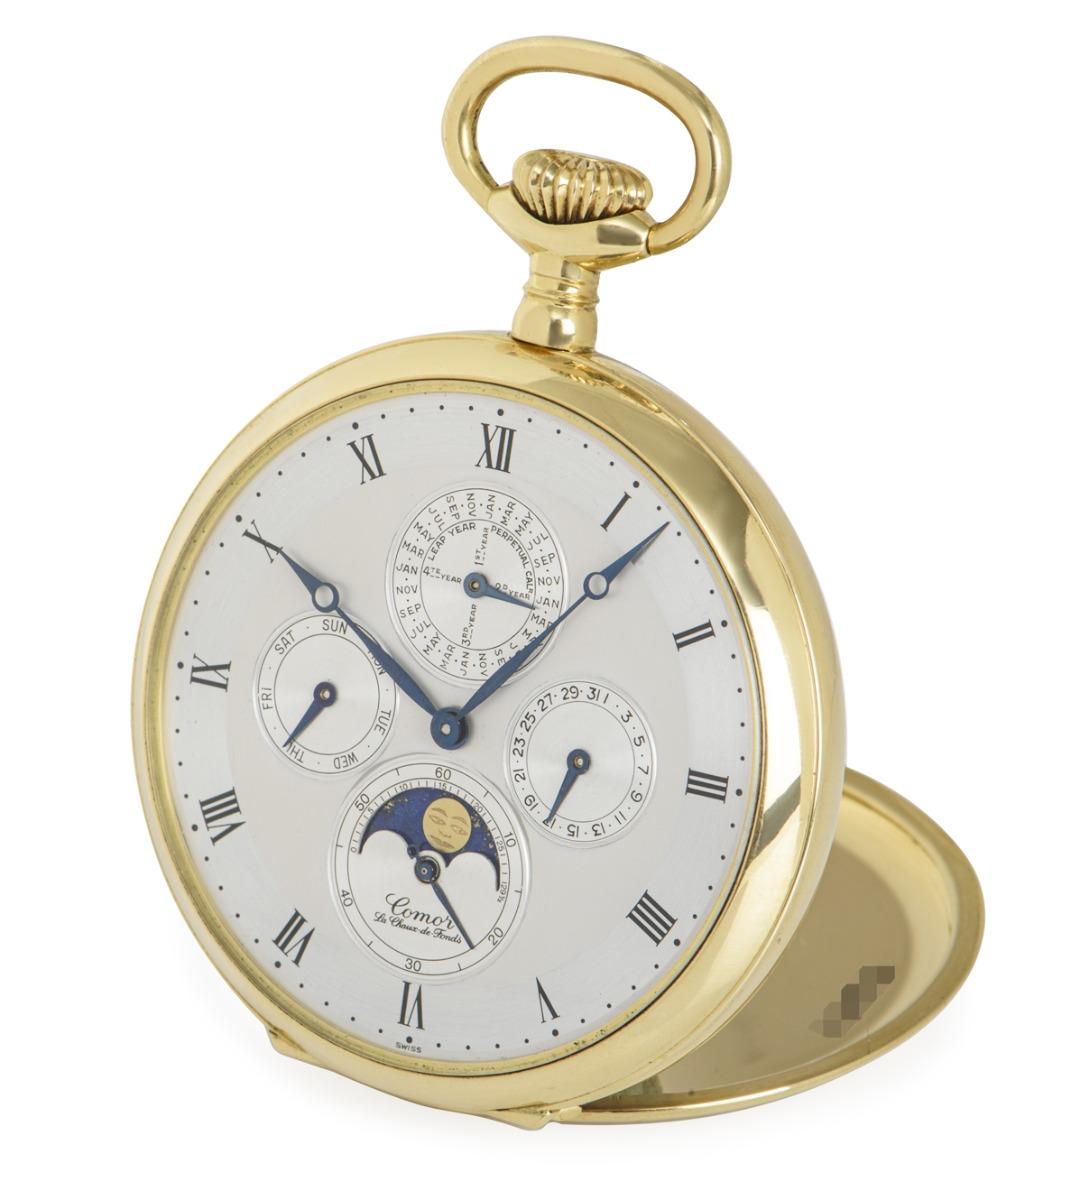 Comor 18kt Yellow Gold Open Face Keyless Lever Perpetual Calendar Moonphase Pocket Watch C1970's

Dial: A Beautiful two tone silvered satin finished chapter ring with Roman numerals. The four satin finished subsidiary dials for day, leap- year cycle